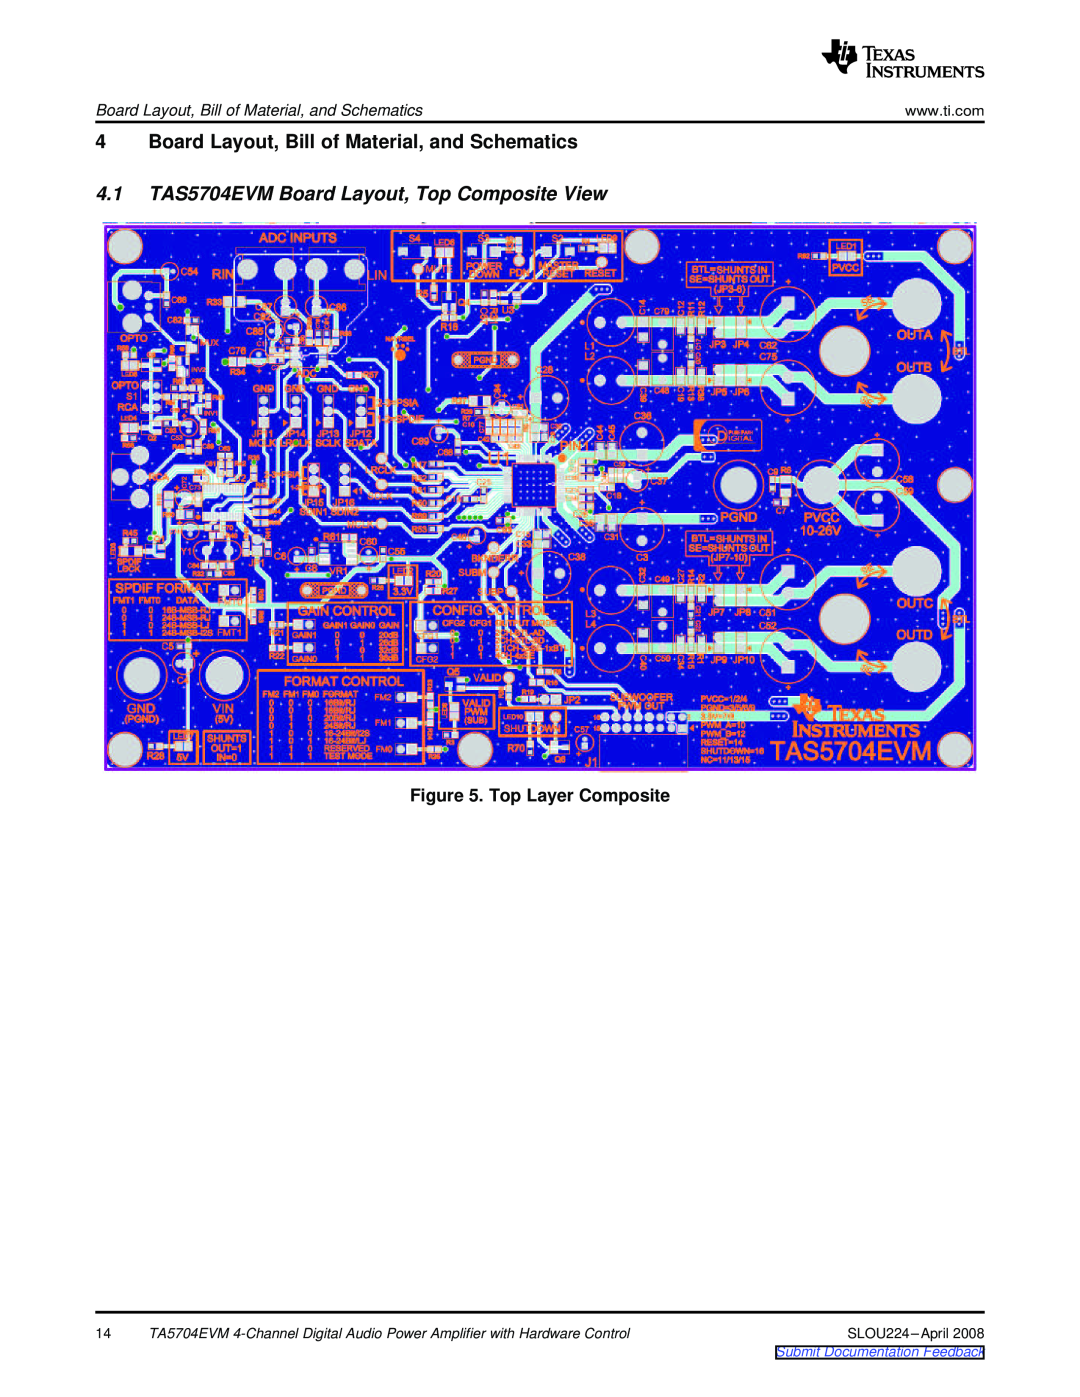 Texas Instruments TA5704EVM Board Layout, Bill of Material, and Schematics, 4.1TAS5704EVM Board Layout, Top Composite View 